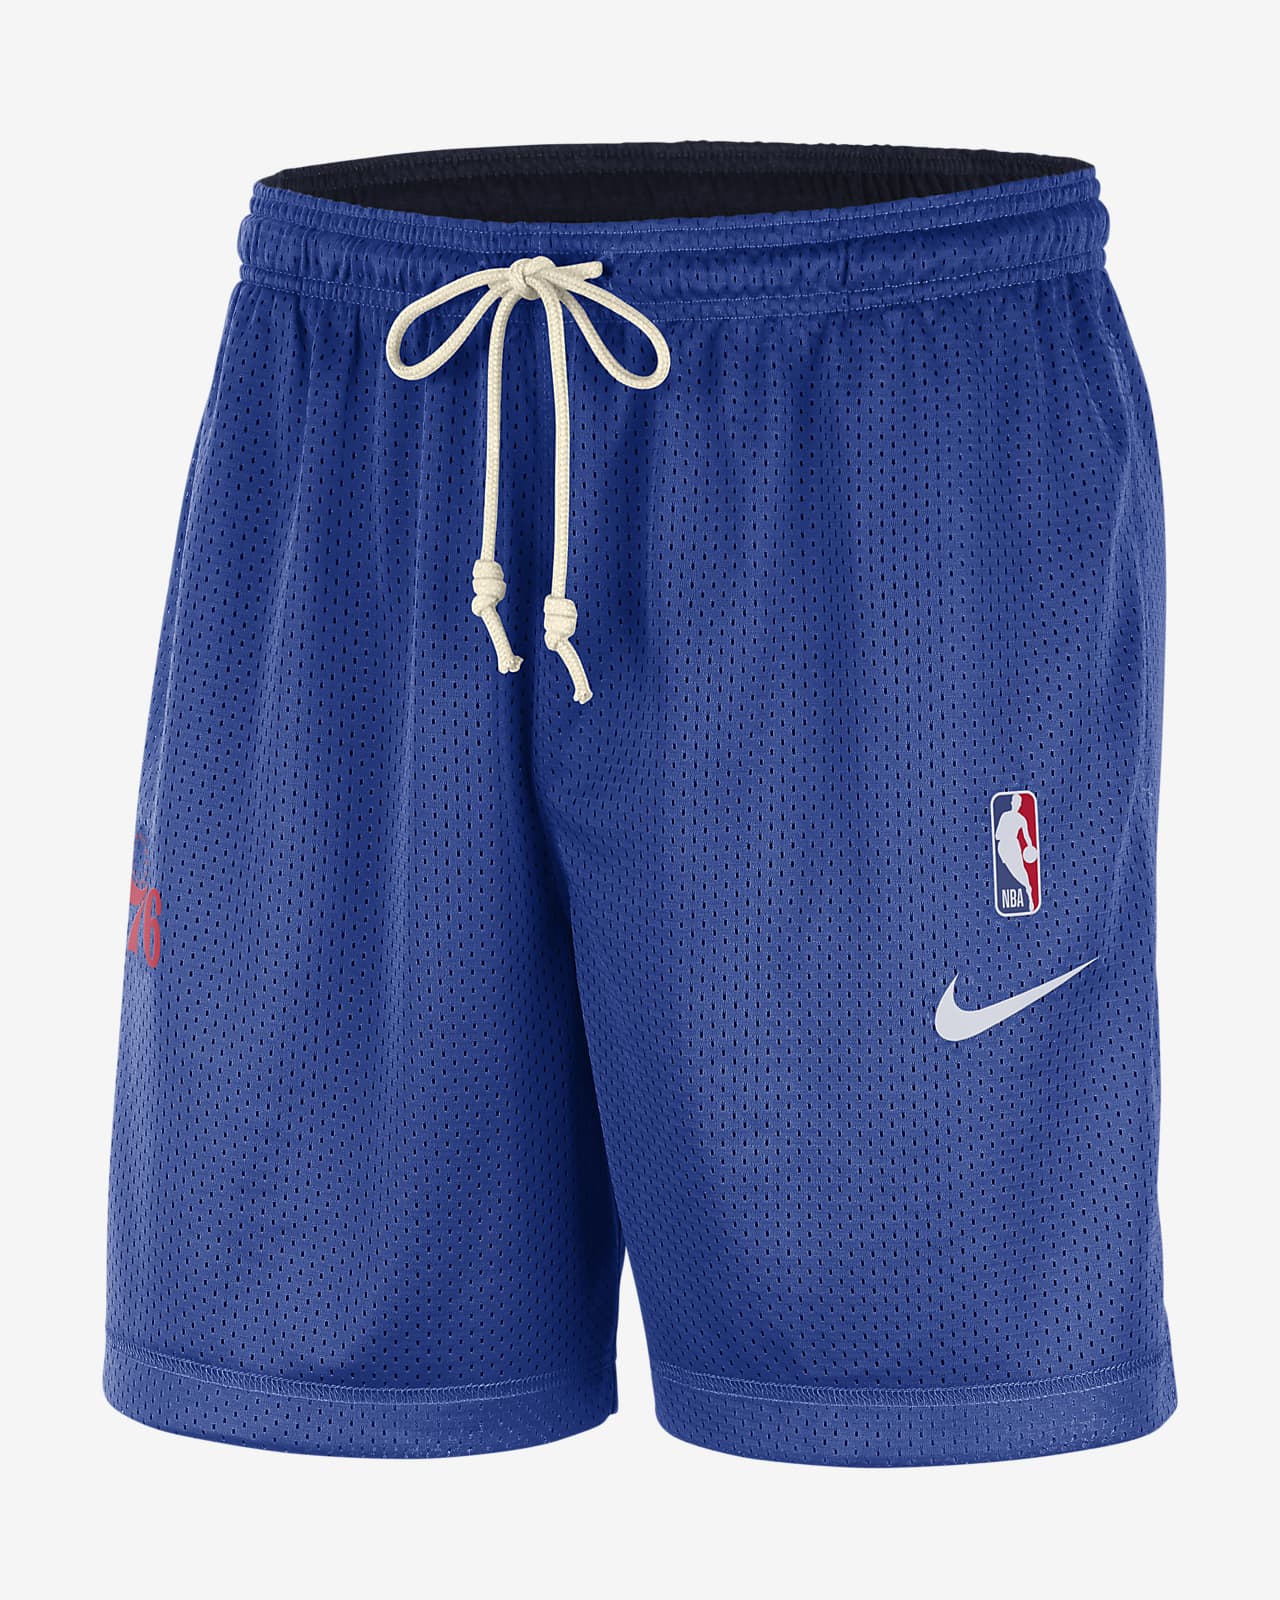 76ers Standard Issue Mens Nike Nba Reversible Shorts | Free Download ...